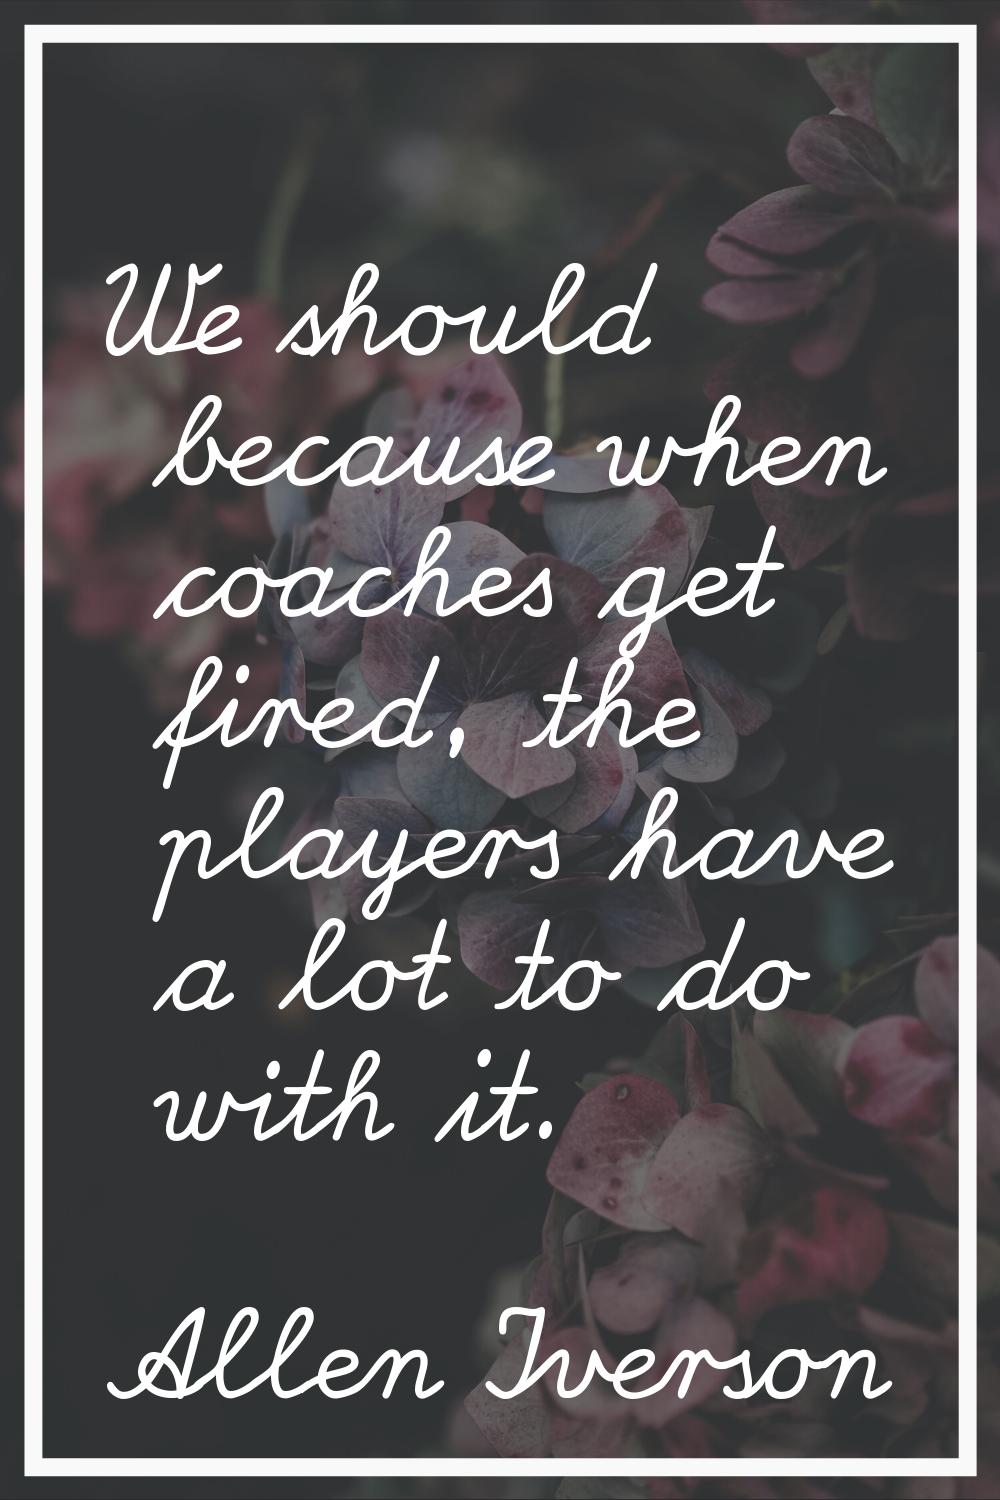 We should because when coaches get fired, the players have a lot to do with it.